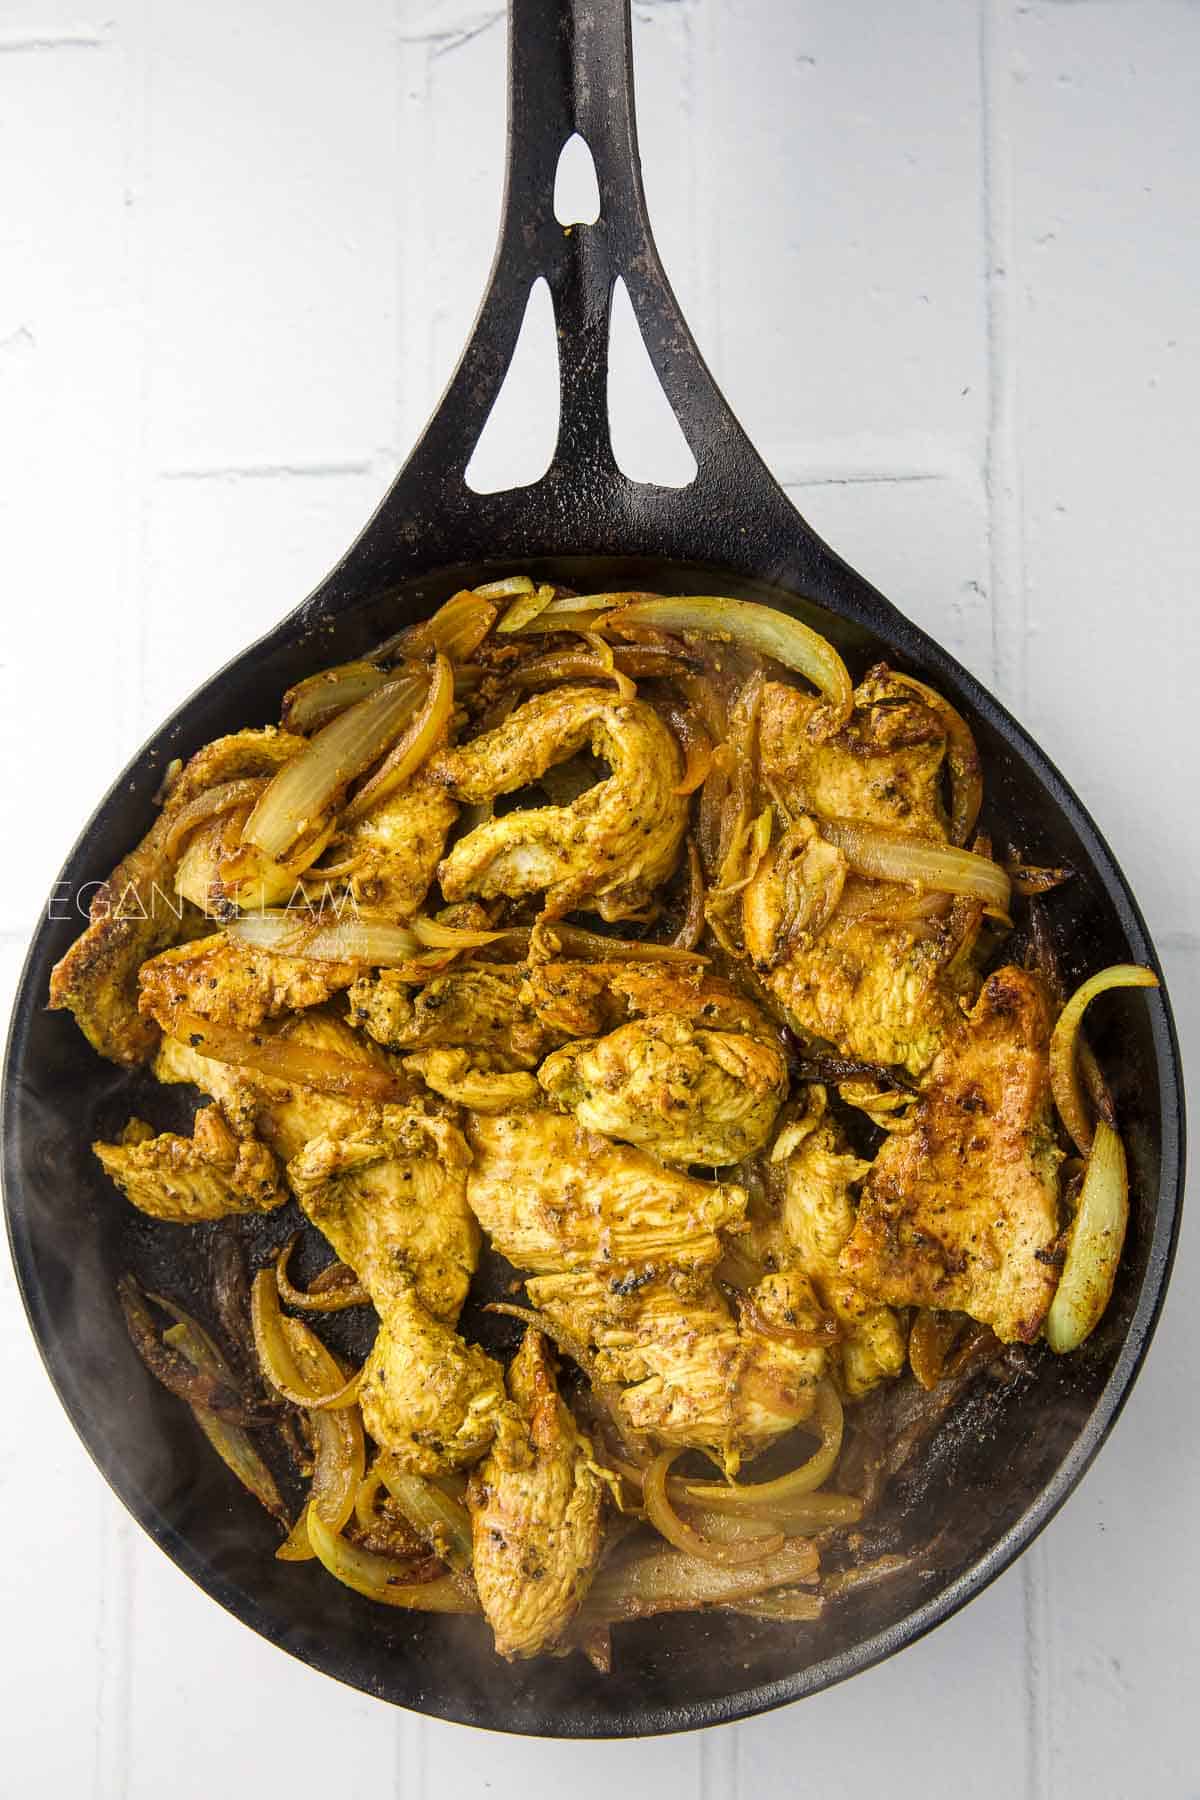 Chicken and onions in a cast iron pan.